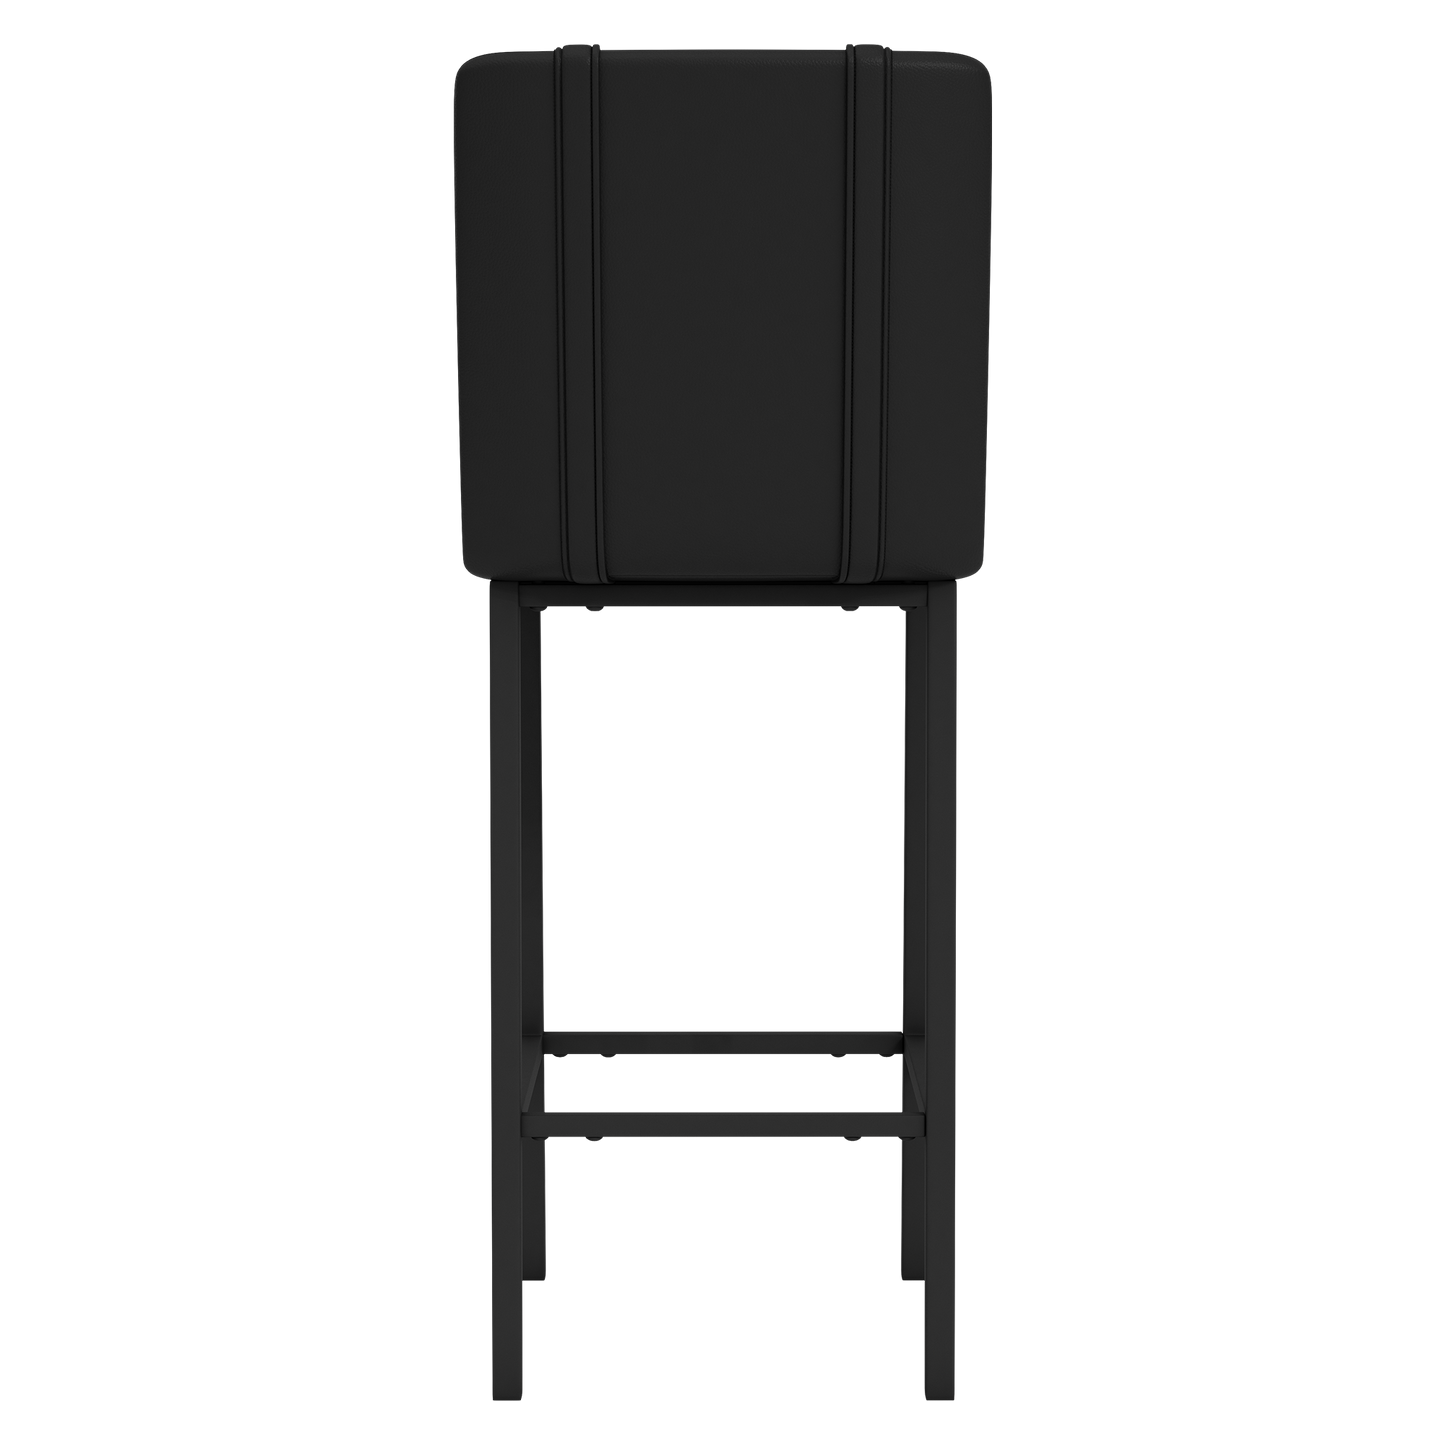 Bar Stool 500 with New York Giants Secondary Logo Set of 2